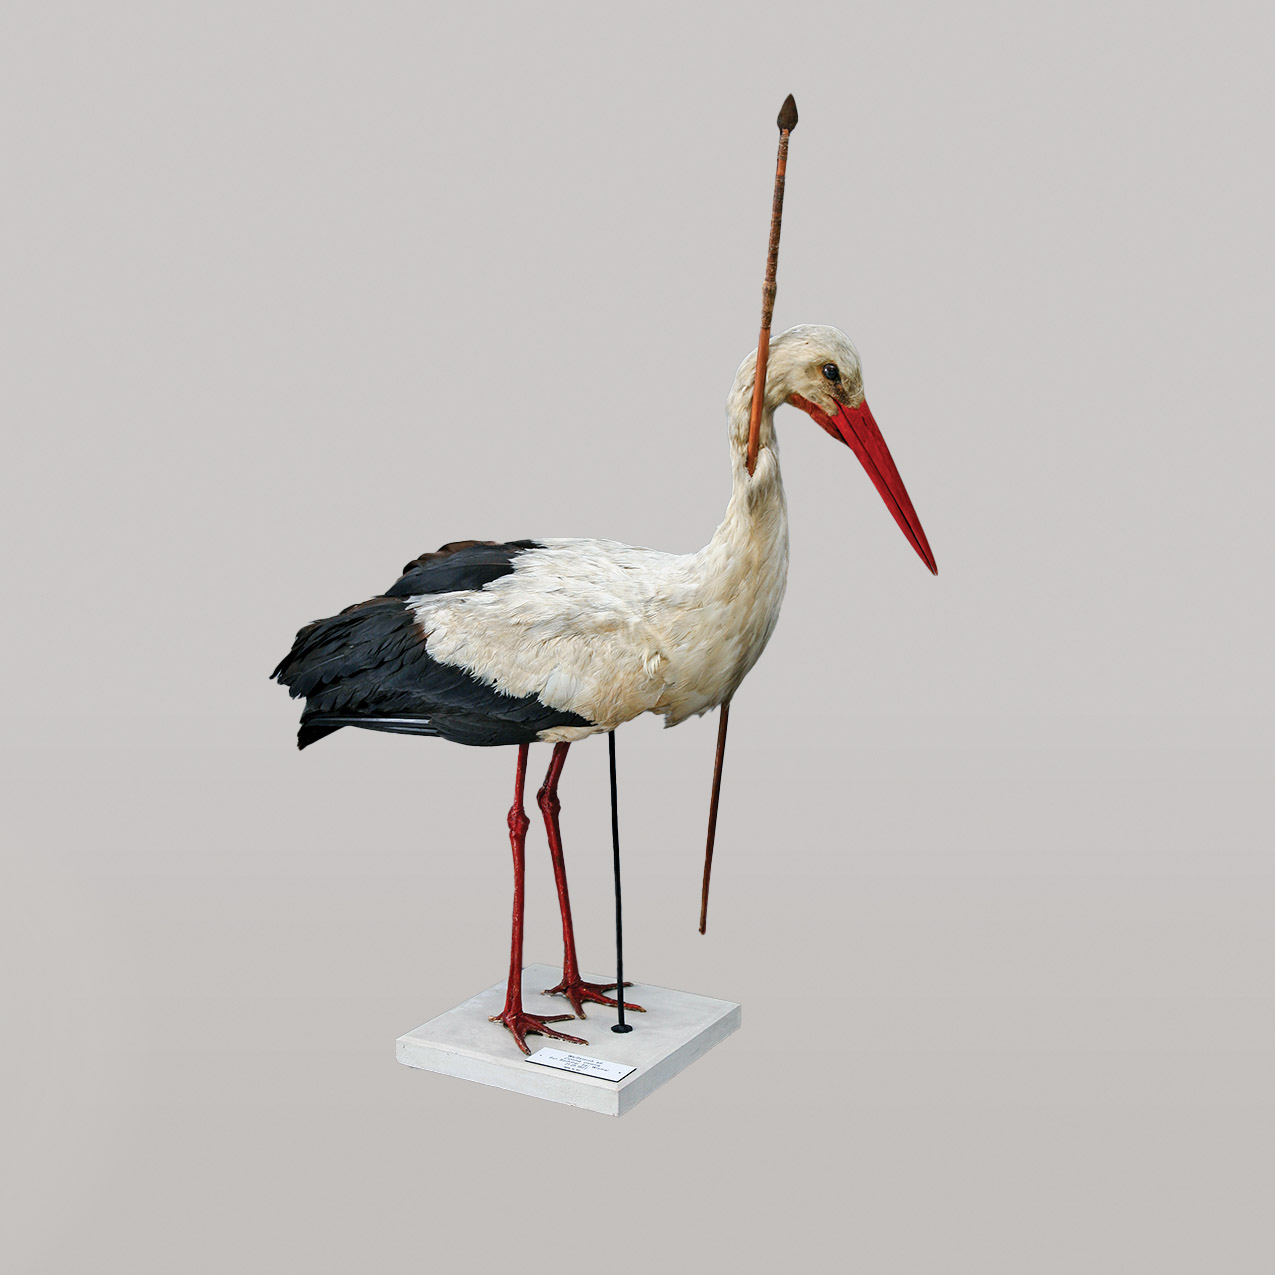 model on a plinth of a stork with a spear thrust vertically through its neck